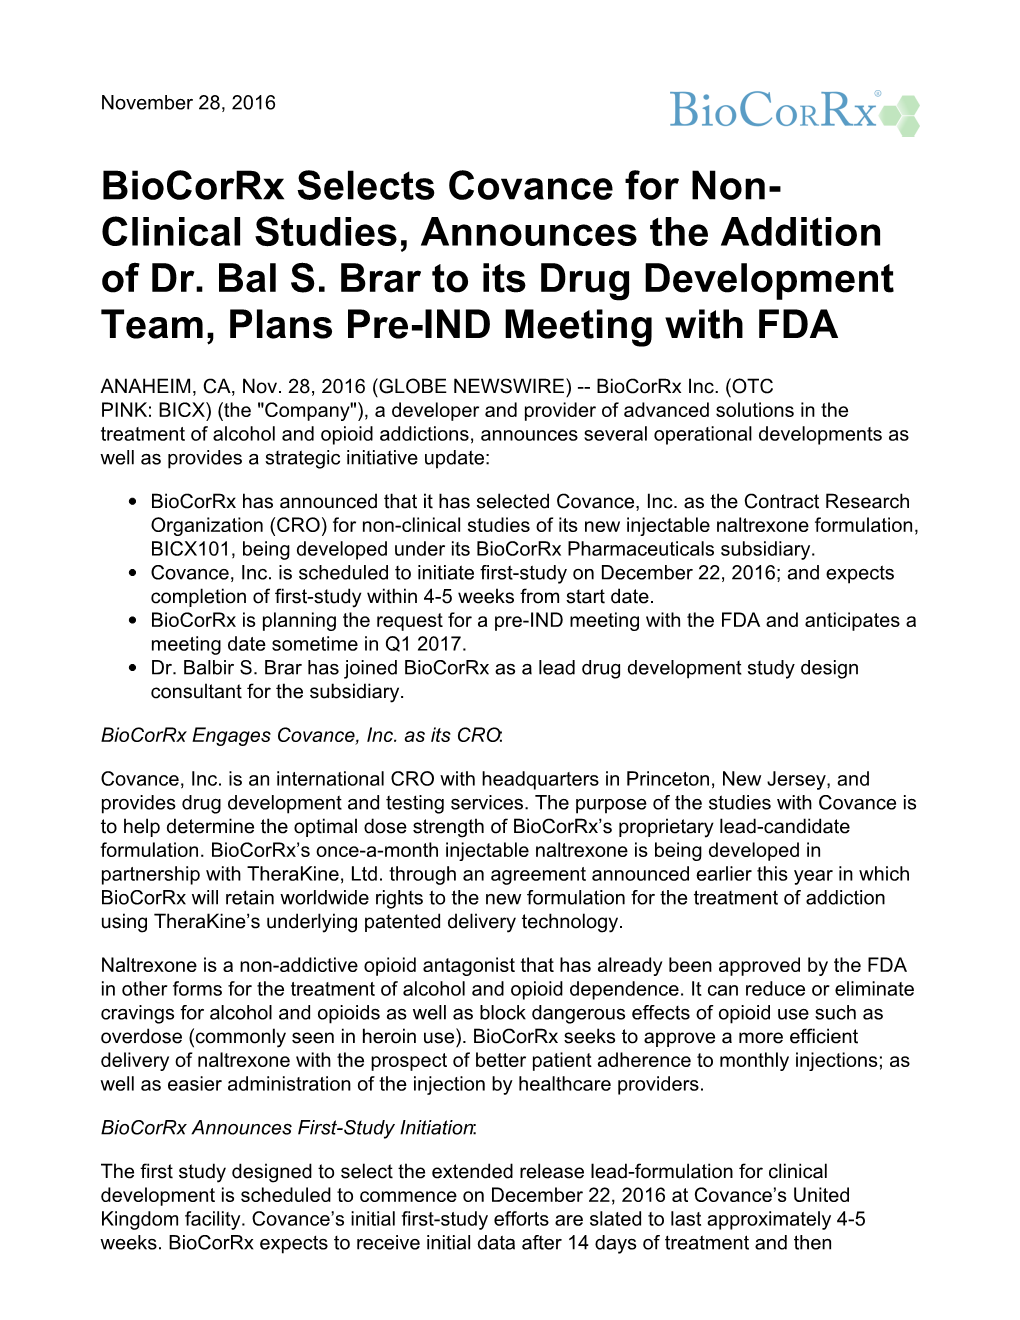 Biocorrx Selects Covance for Non- Clinical Studies, Announces the Addition of Dr